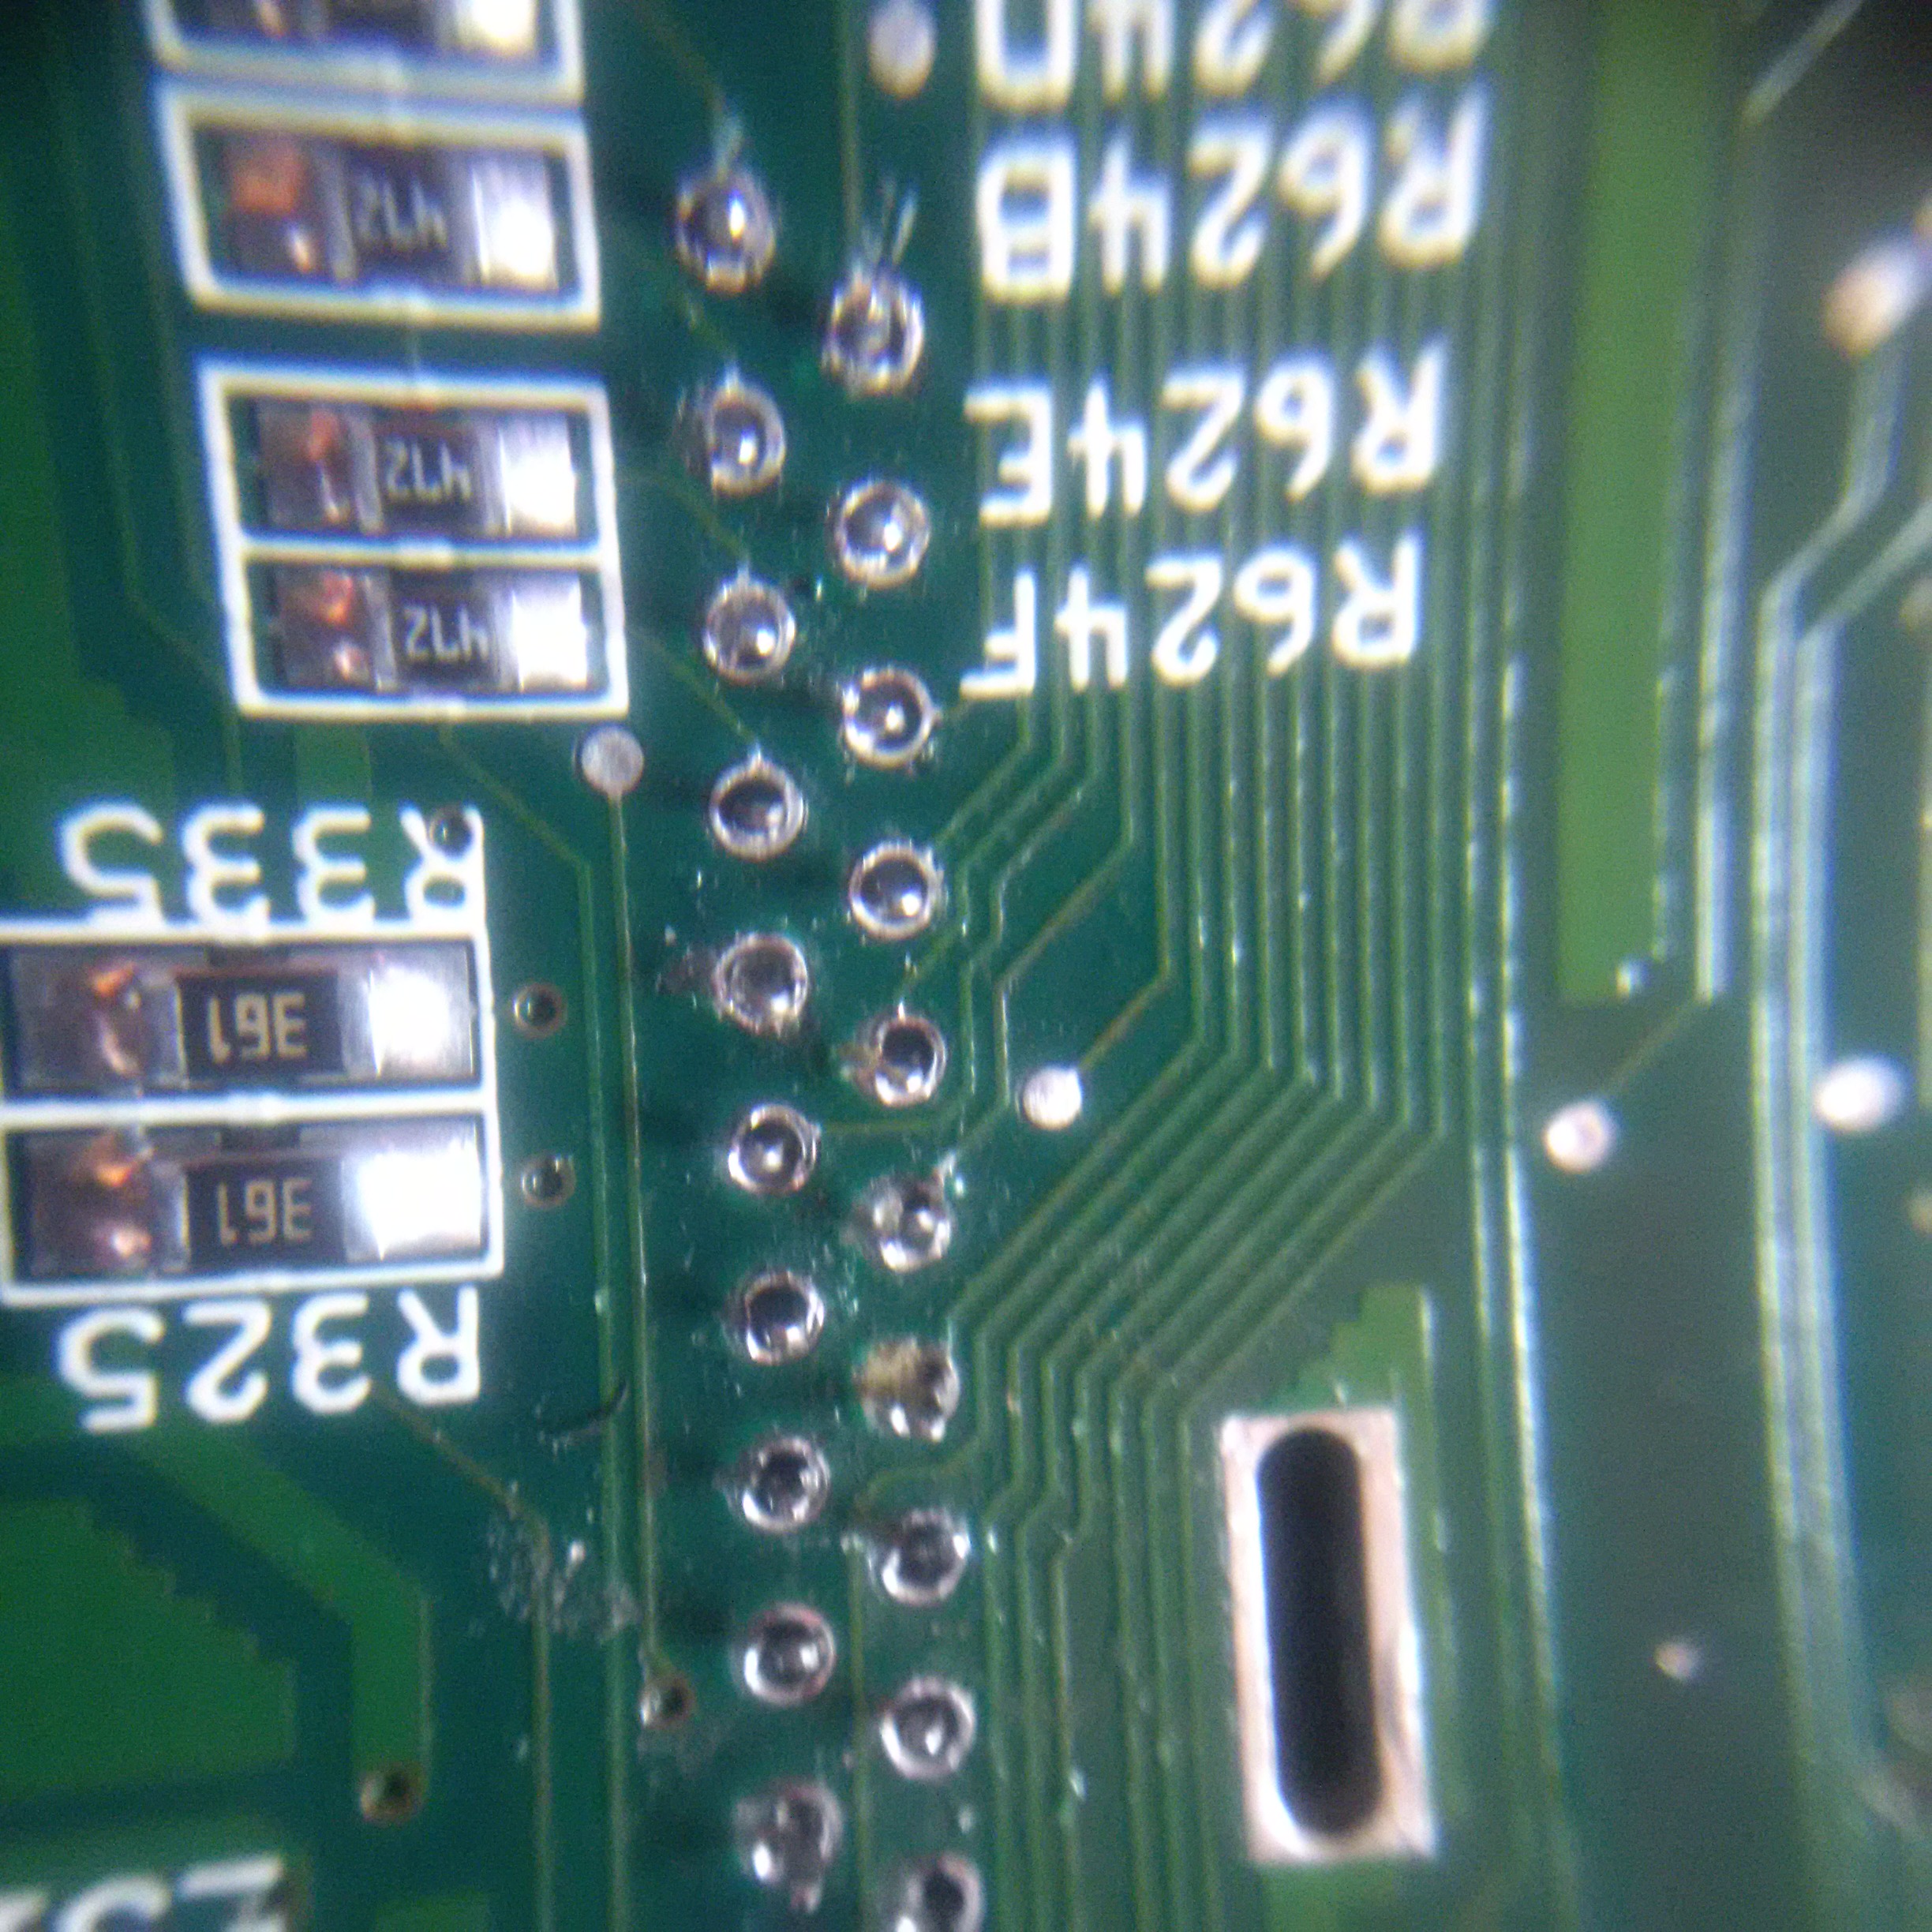 Most solder removed from keyboard connector